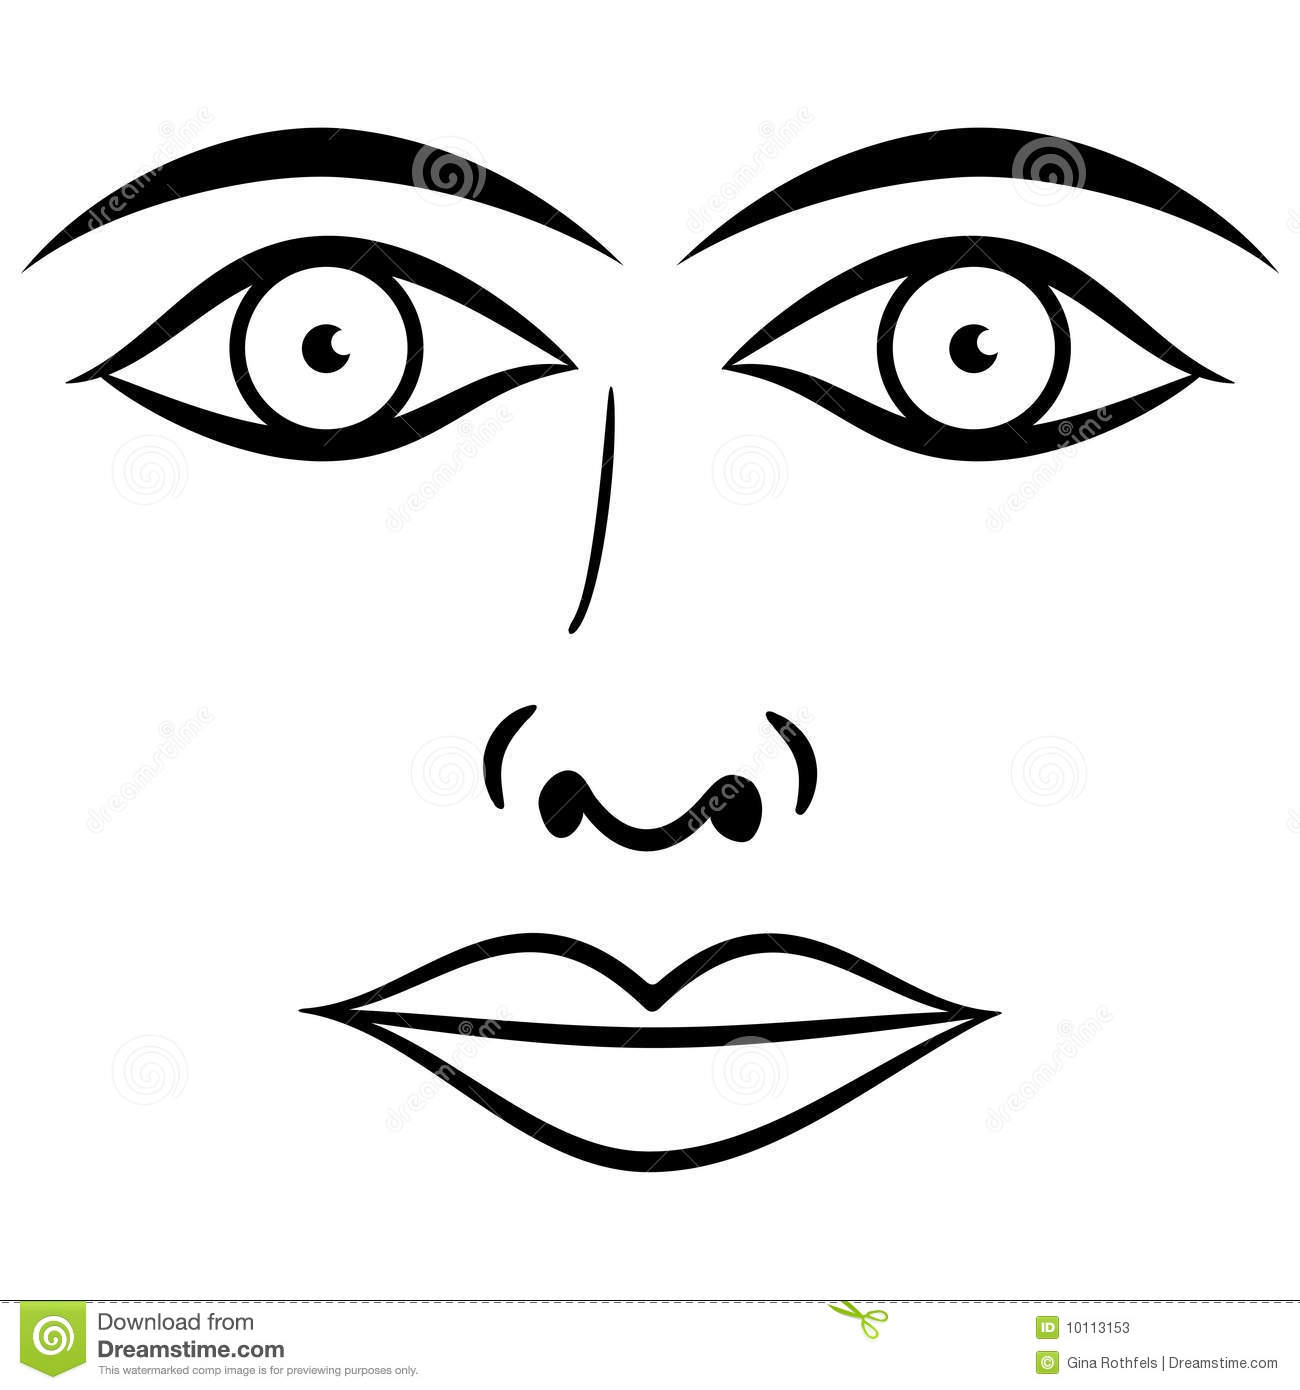 Black And White Face Vector  In Vector Format The Lips And Irises Of